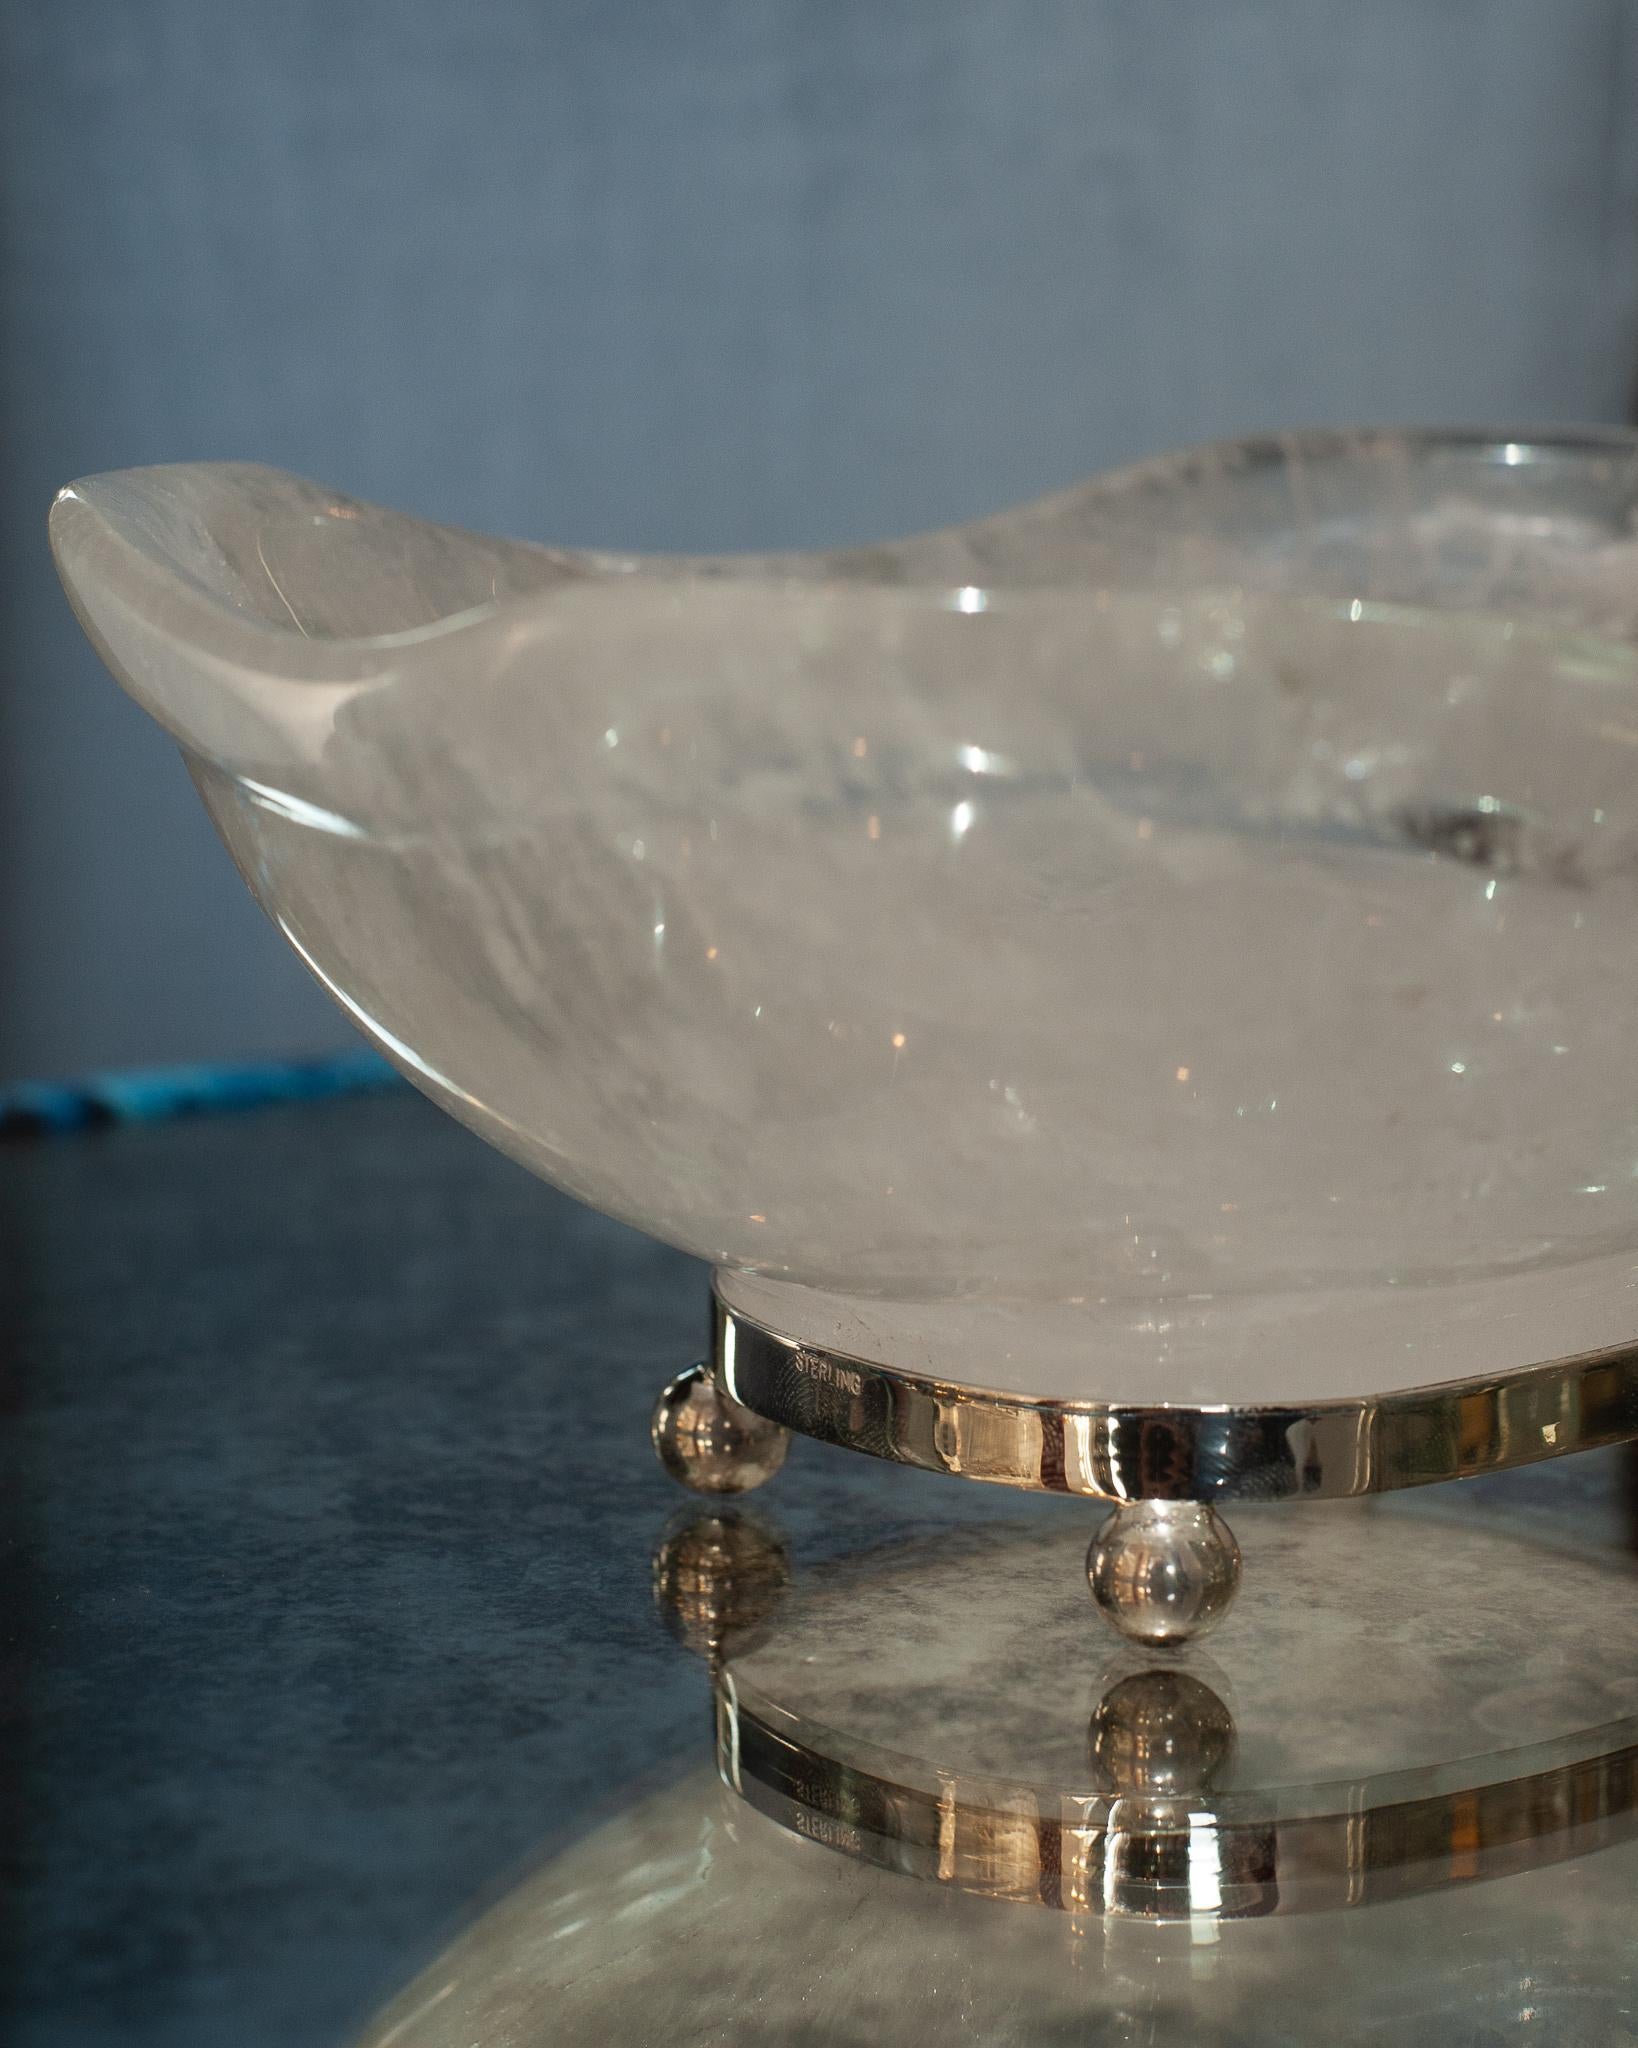 Bring the healing energy of rock crystal into your home with this beautiful carved bowl. This delicately carved bowl with a scalloped edge can filled with candies or kept sculptural as an empty vessel and placed in any space.